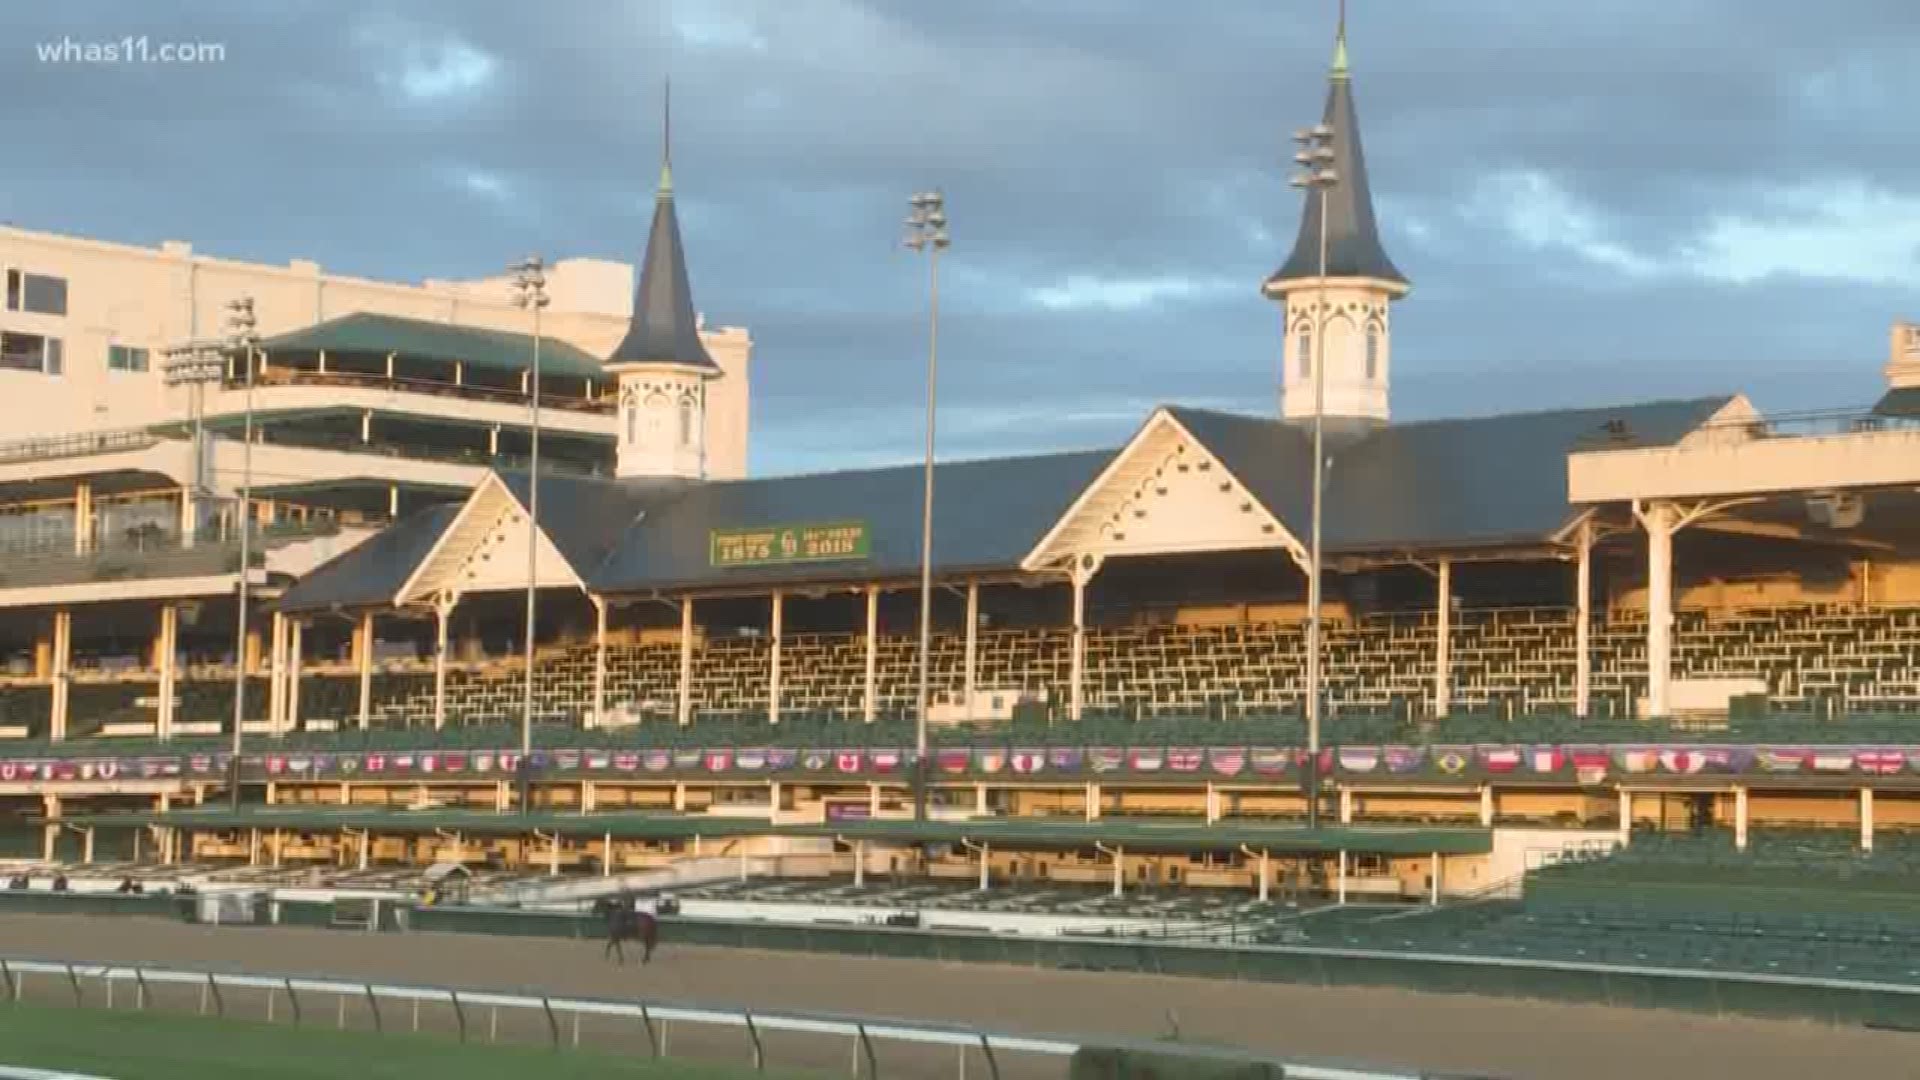 Police are preparing for Derby-size crowds in November as the Breeder's Cup is hosted at Churchill Downs.